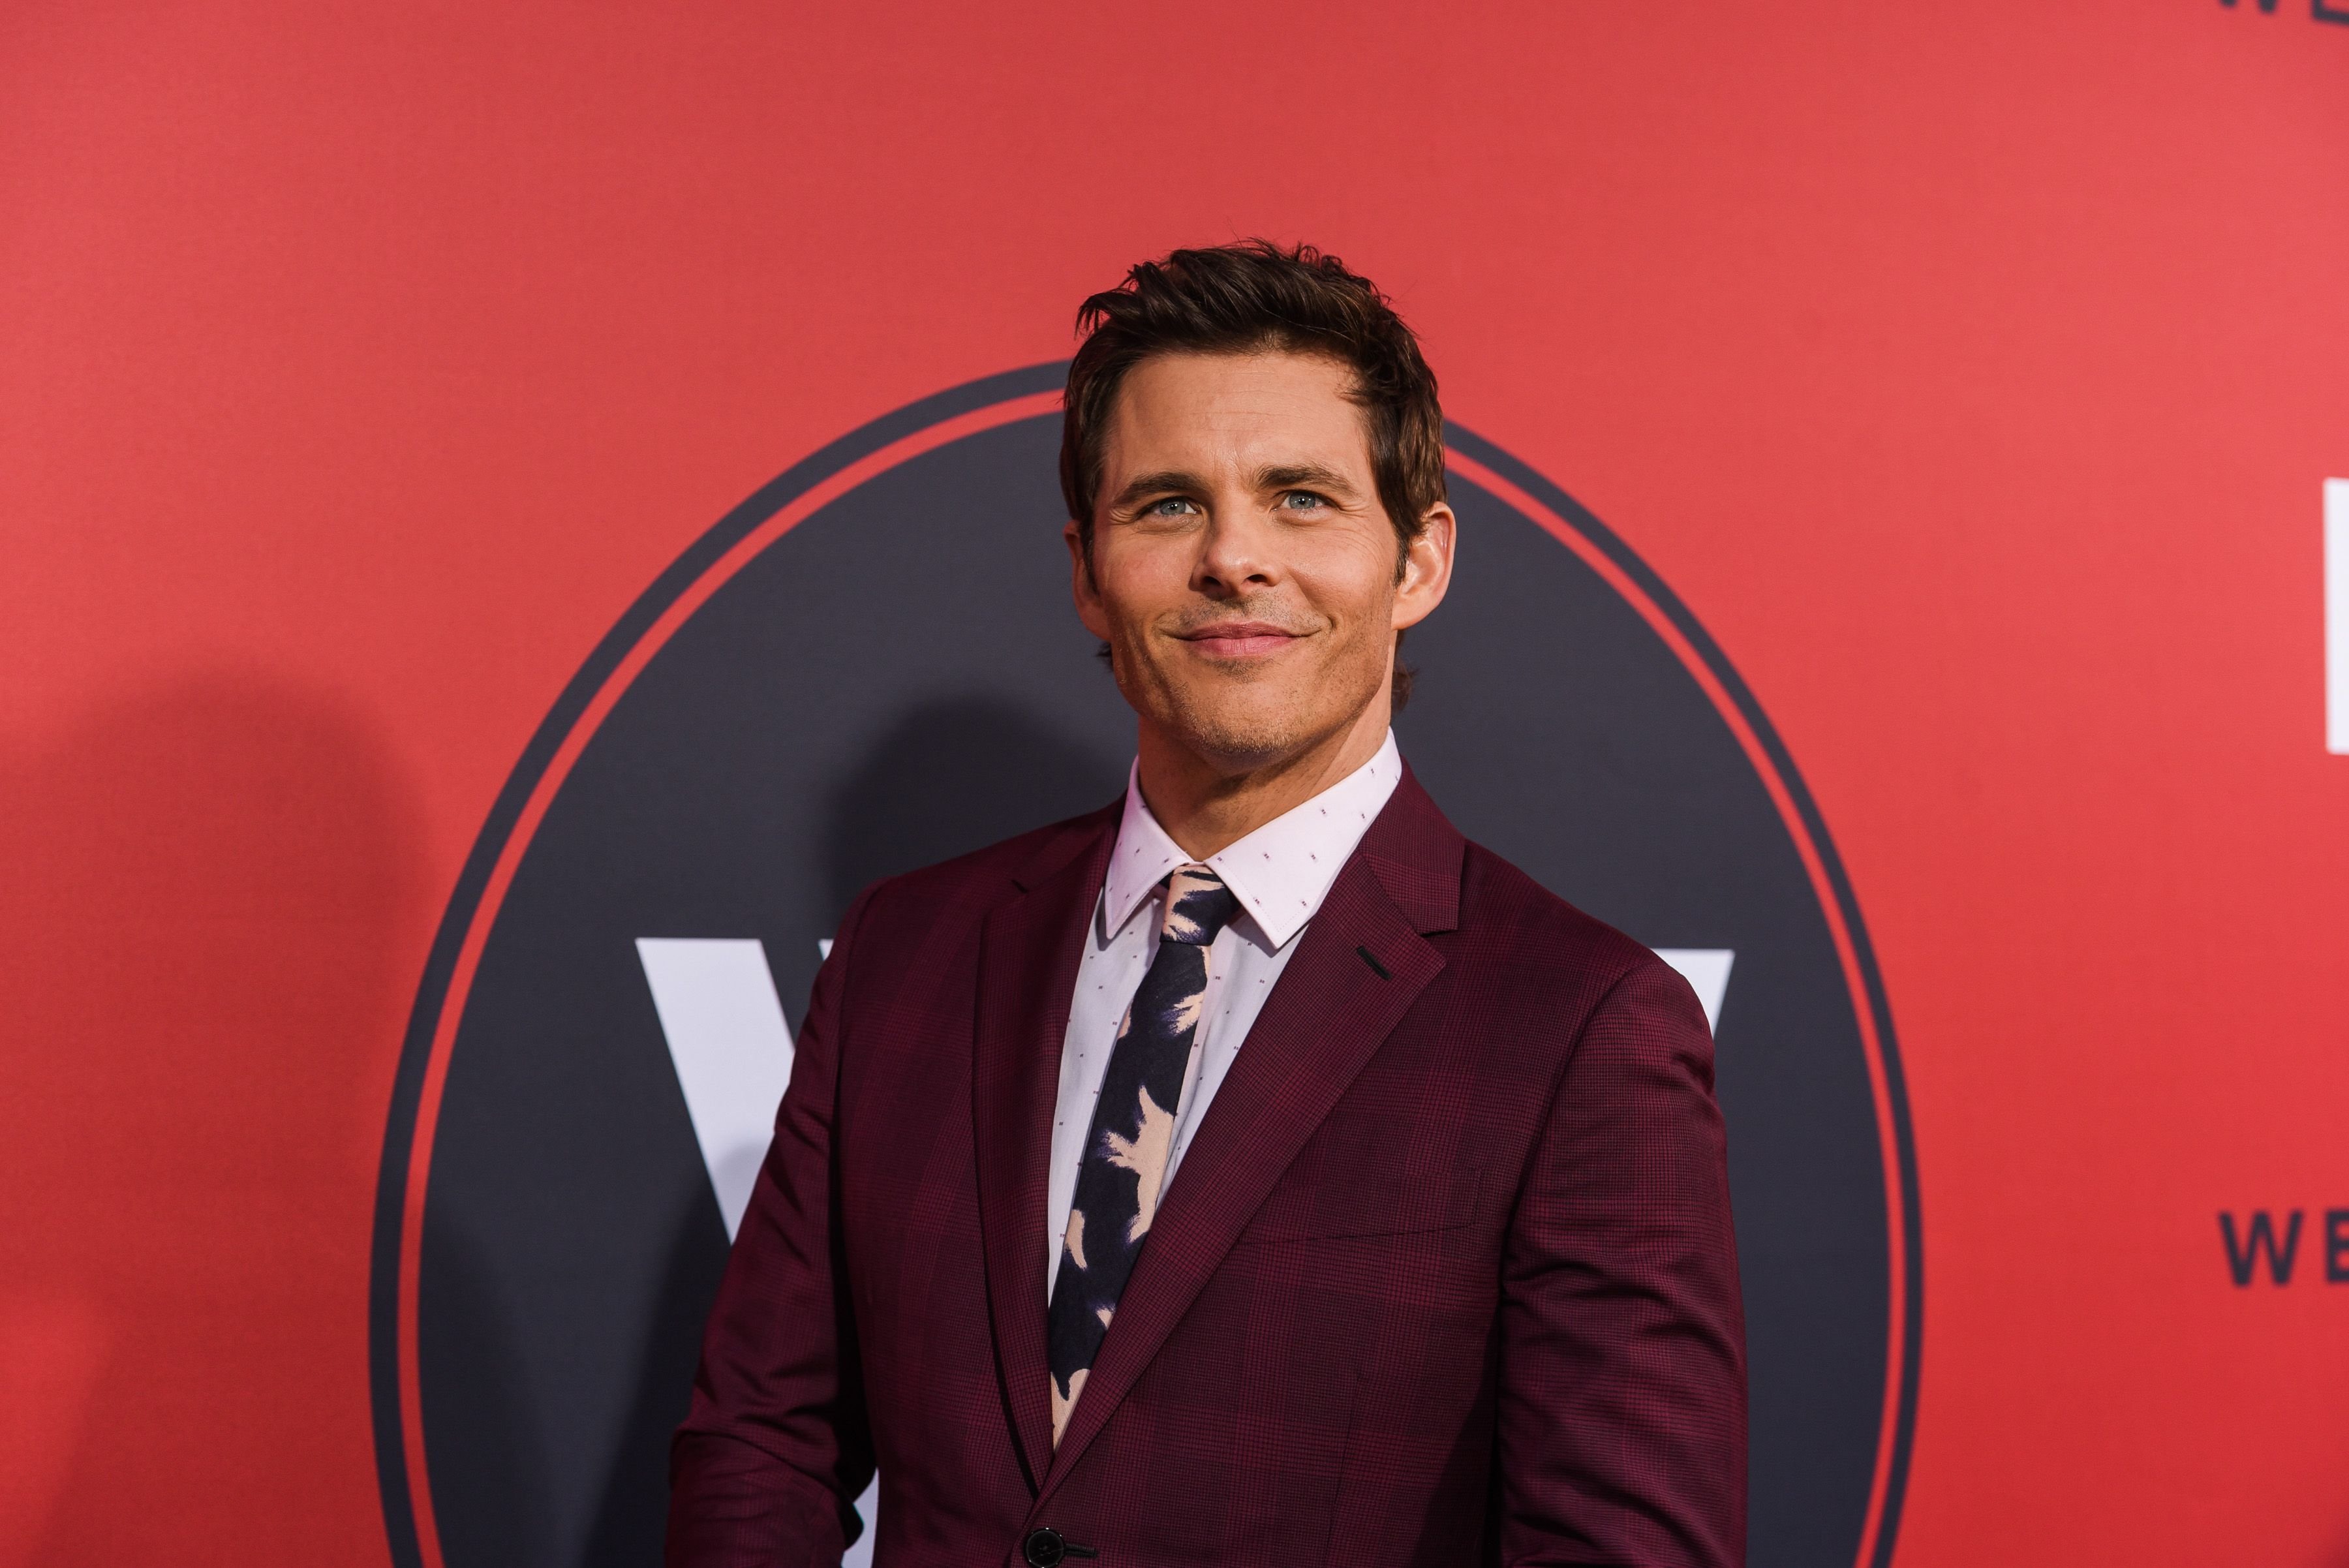 James Marsden at the Season 2 premiere of "Westworld" in Los Angeles on April 16, 2018 | Photo: Getty Images